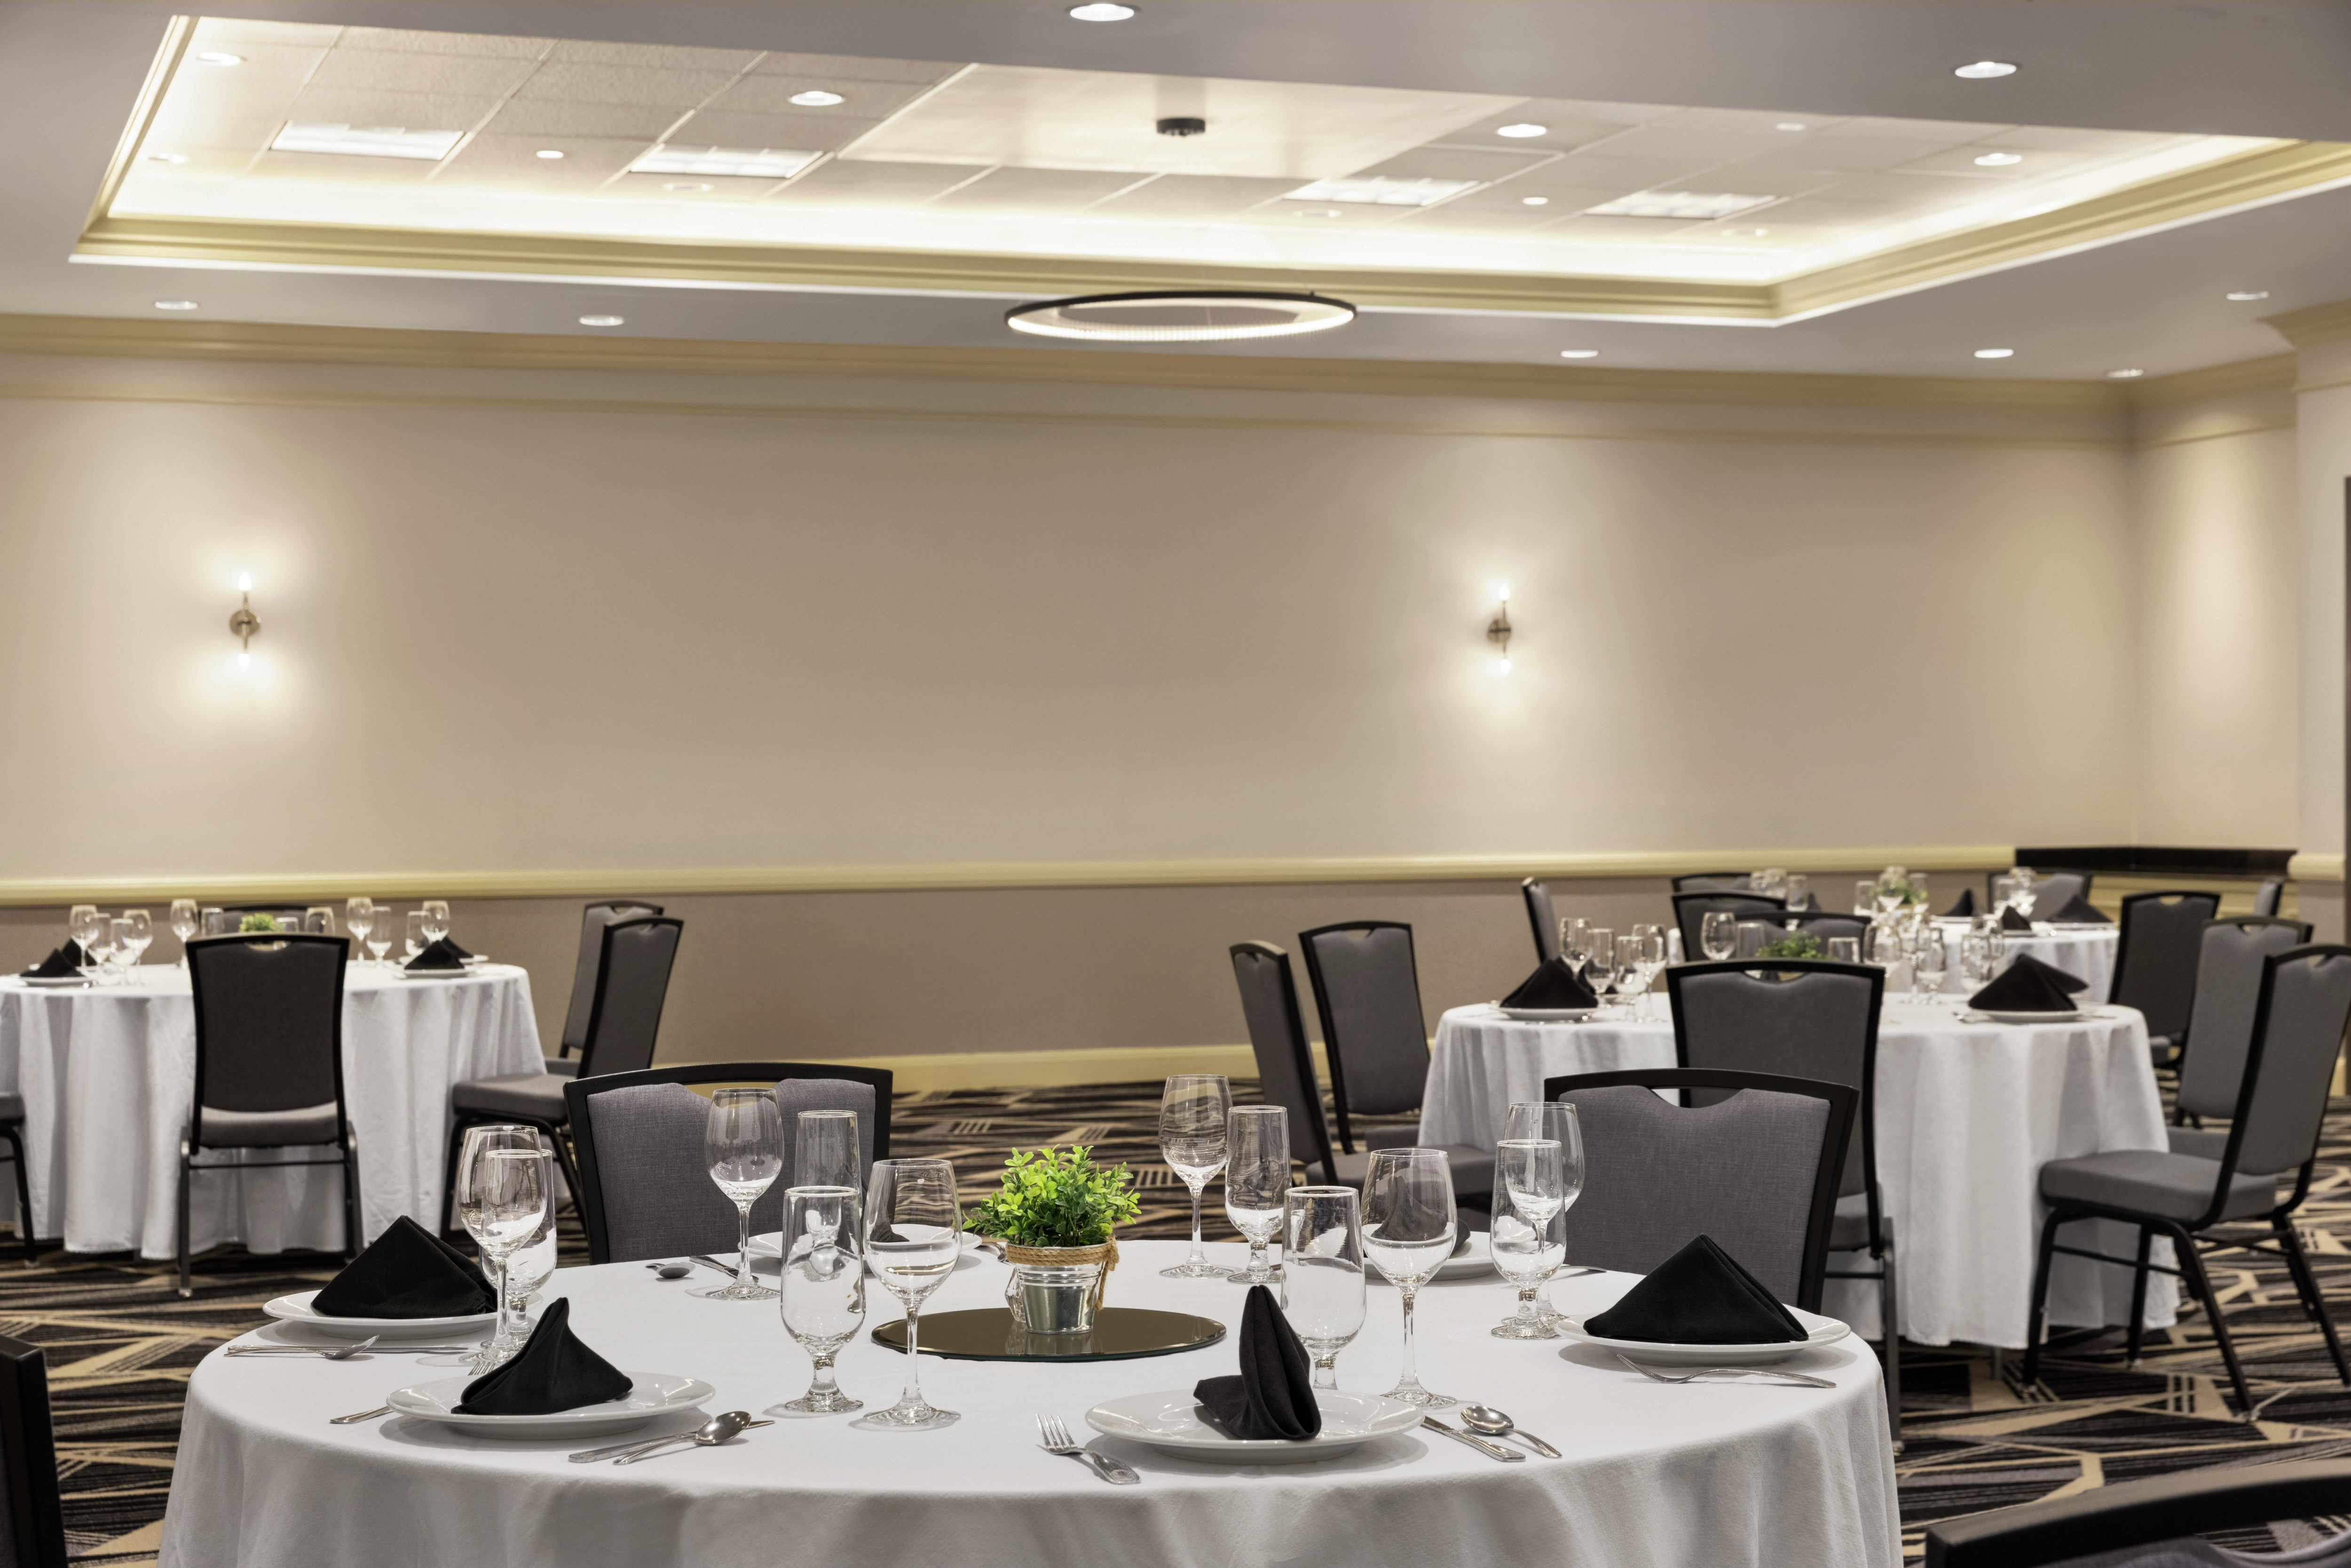 Spacious on-site ballroom equipped with banquet style setup for corporate events and functions.